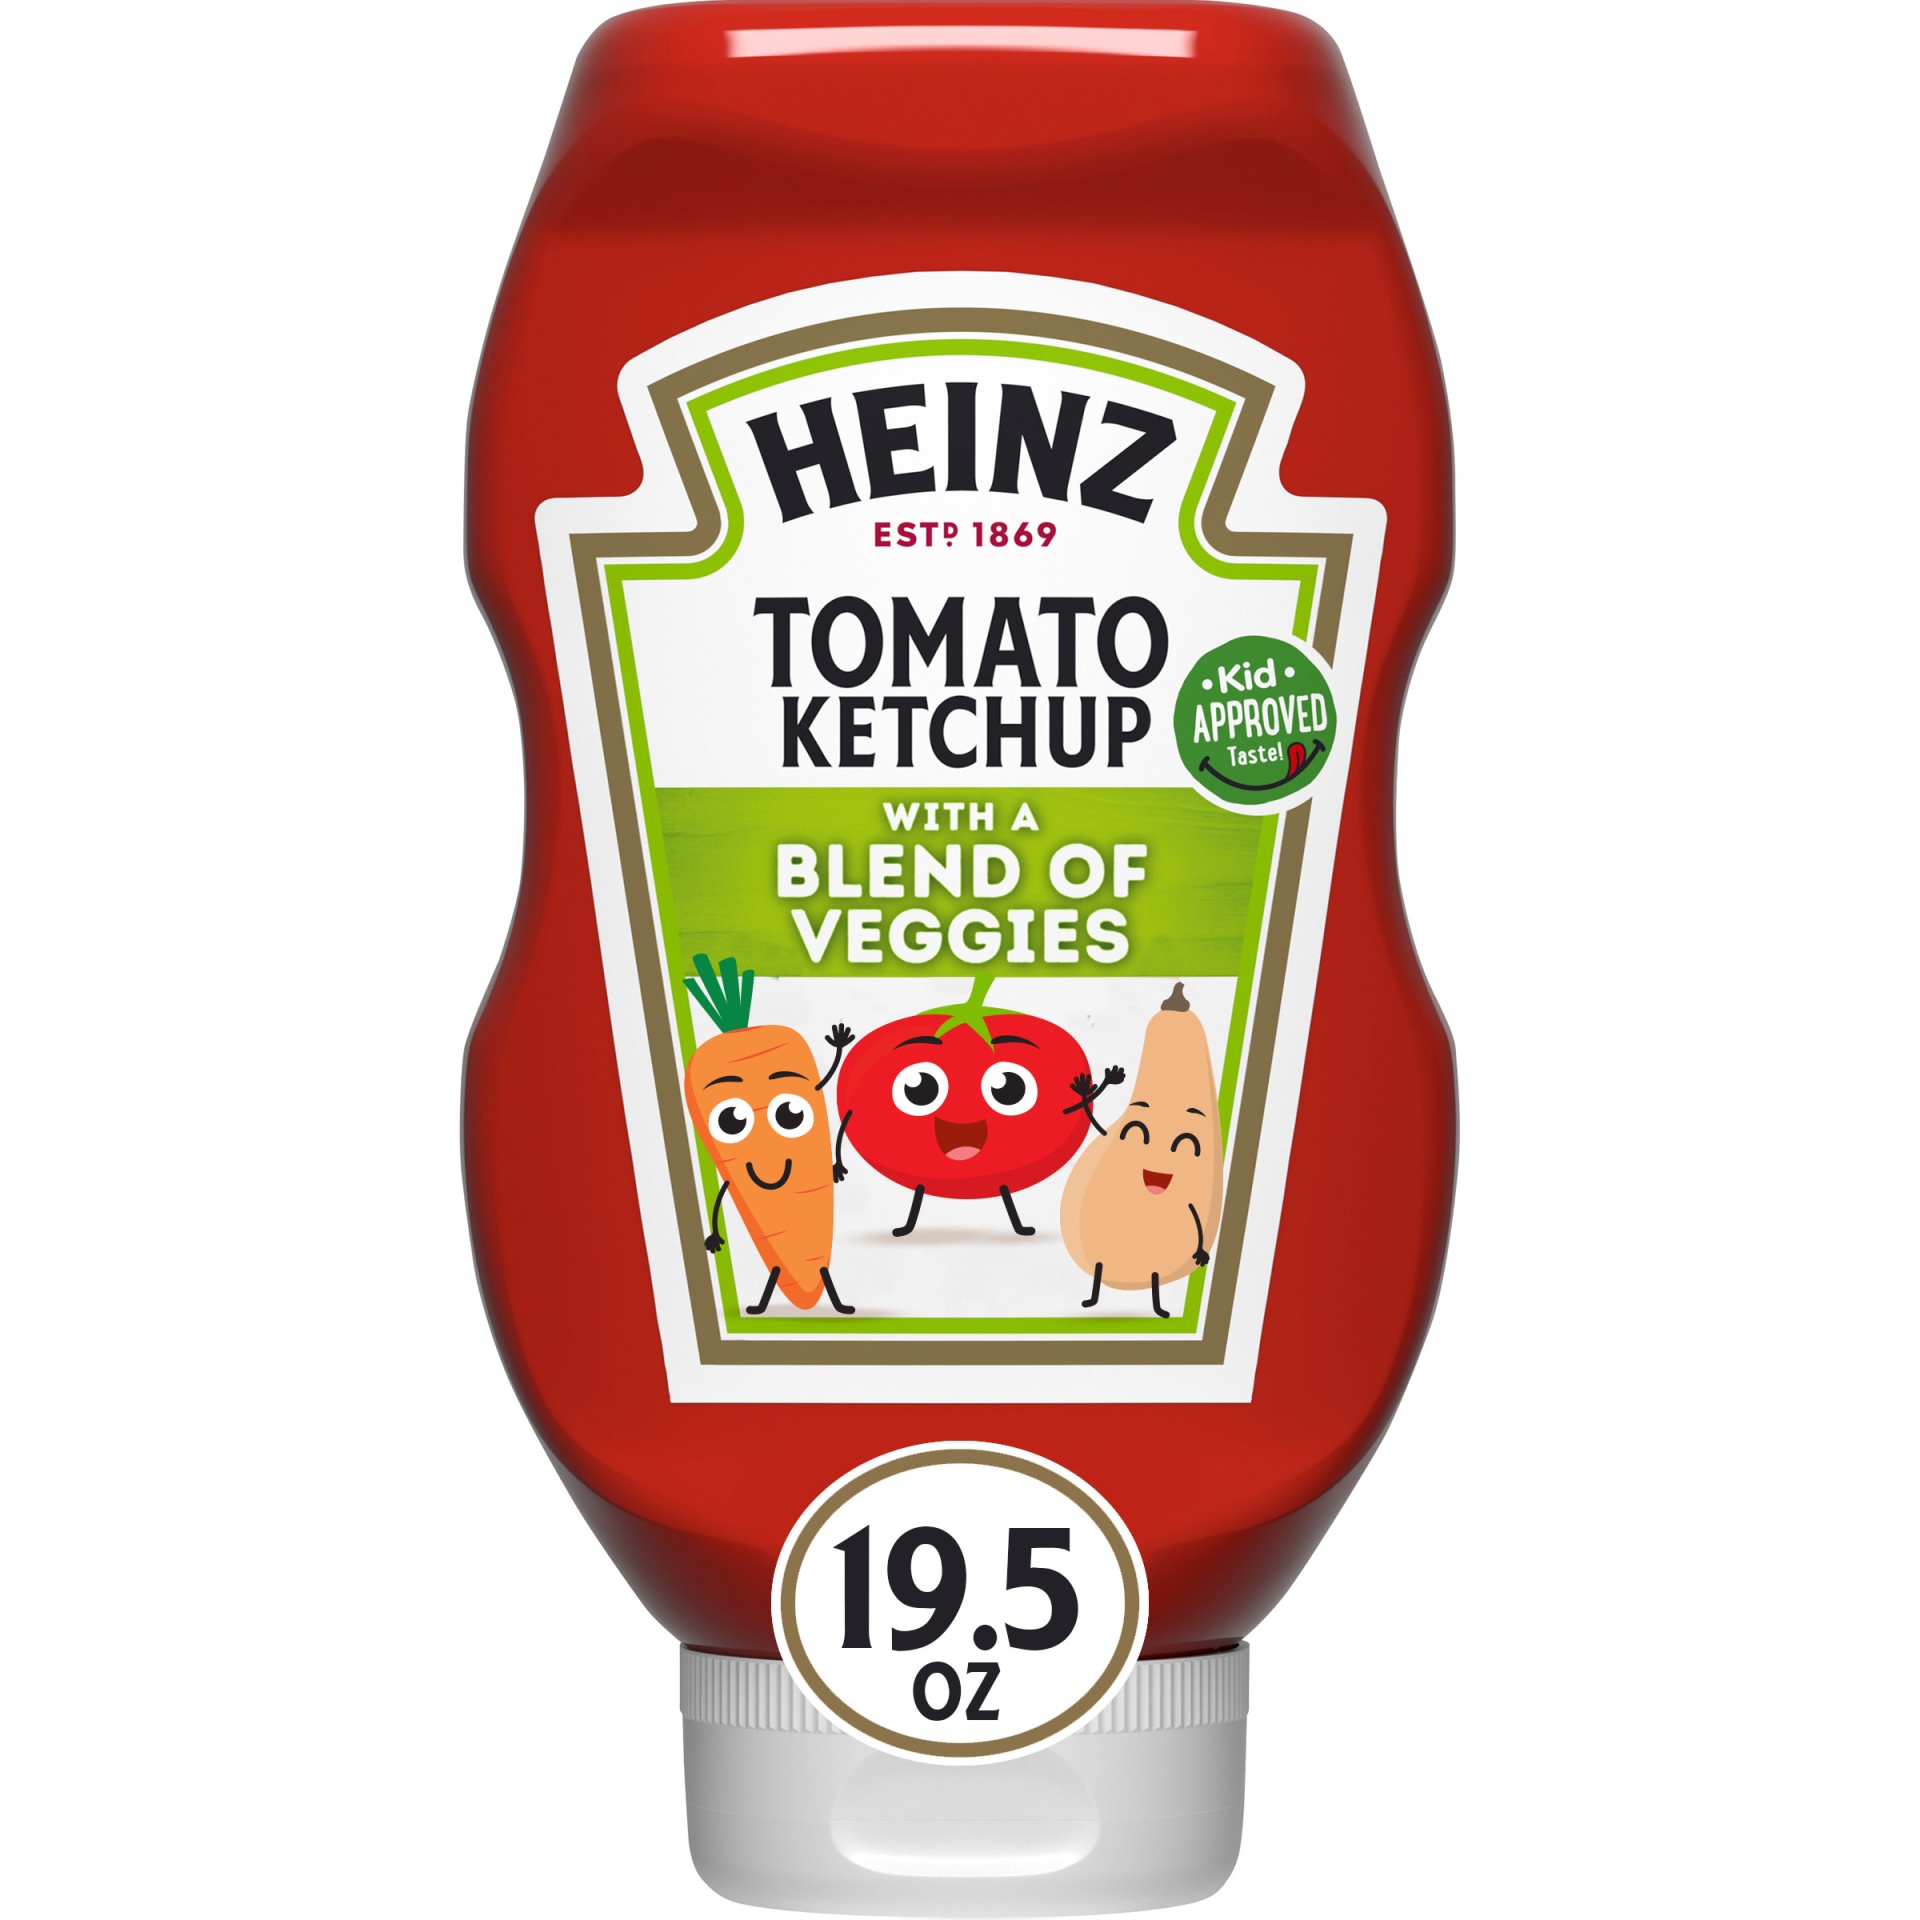 slide 1 of 9, Heinz Tomato Ketchup with a Blend of Veggies Bottle, 19.5 oz